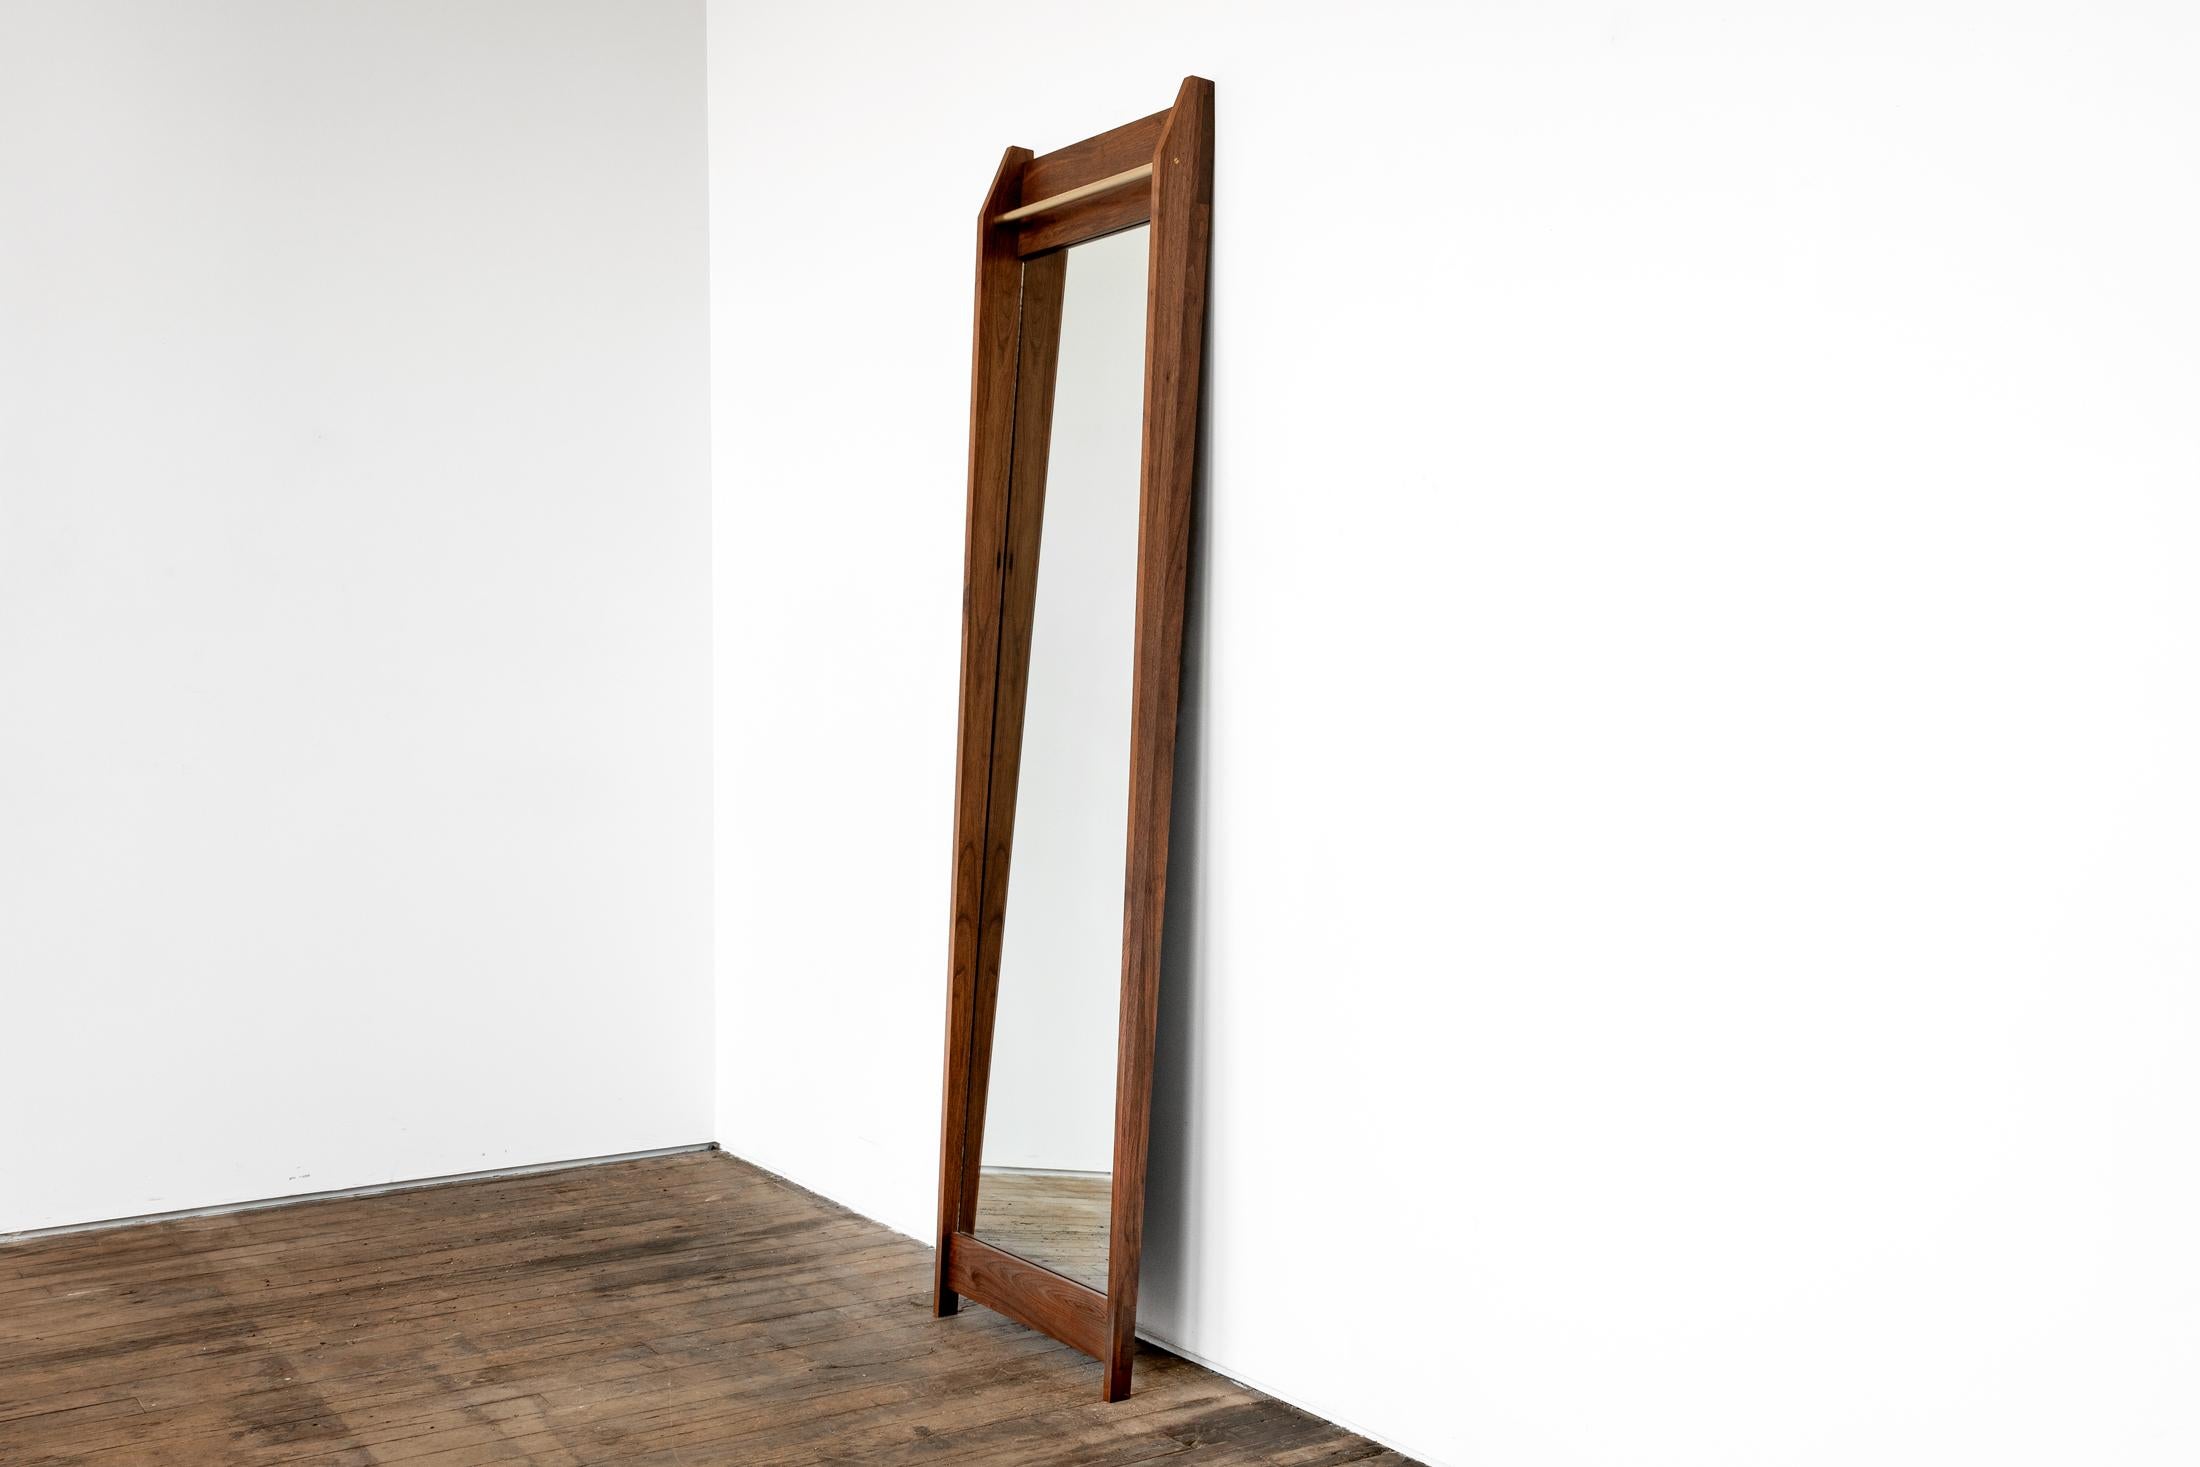 Am1 is a handmade, elegant full length mirror that leans effortlessly against the wall, with the added detail of an upper bronze bar, to hang whatever you please.

Shown in solid walnut with bronze accent

Dimensions: 24”W x 84”H

All of our